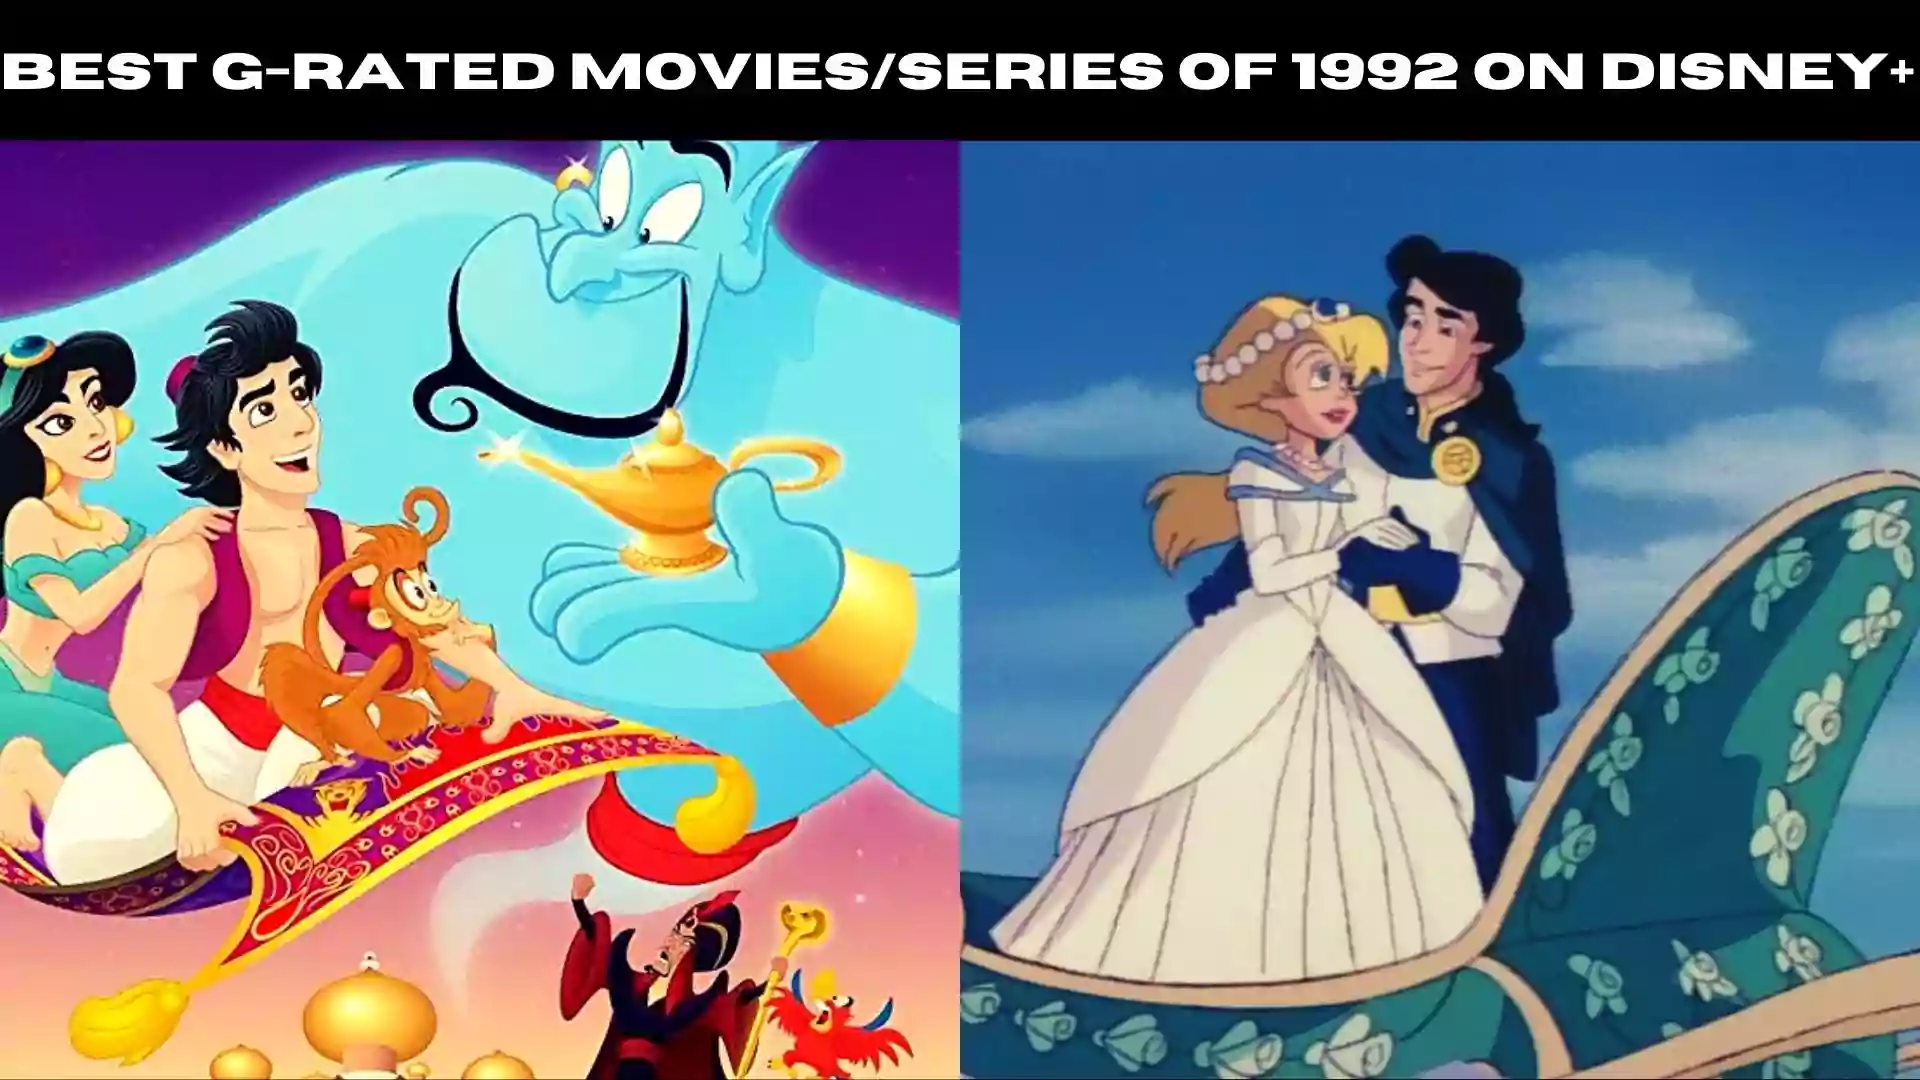 Best G-Rated Movies/series of 1992 on Disney+